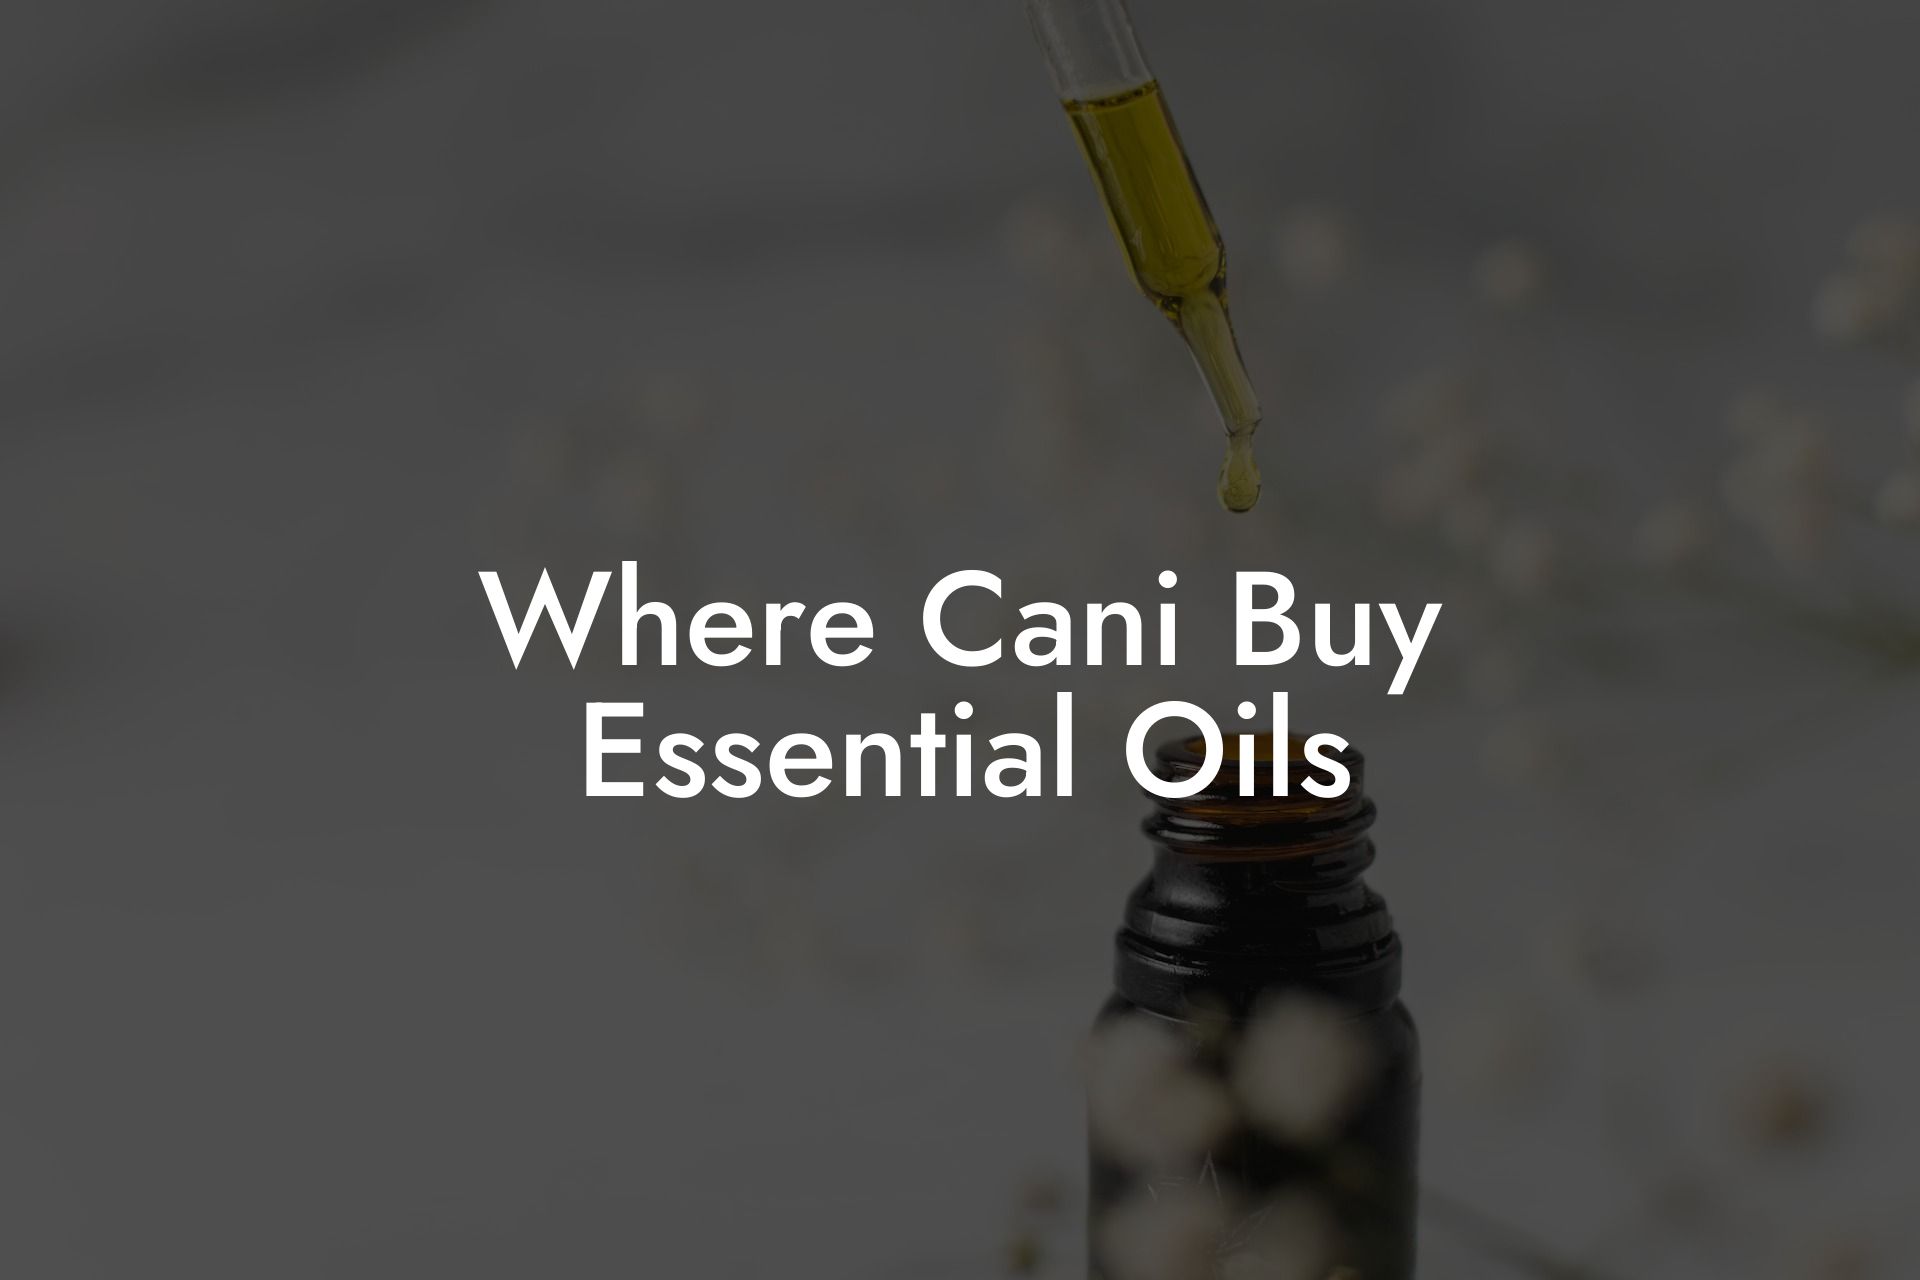 Where Cani Buy Essential Oils